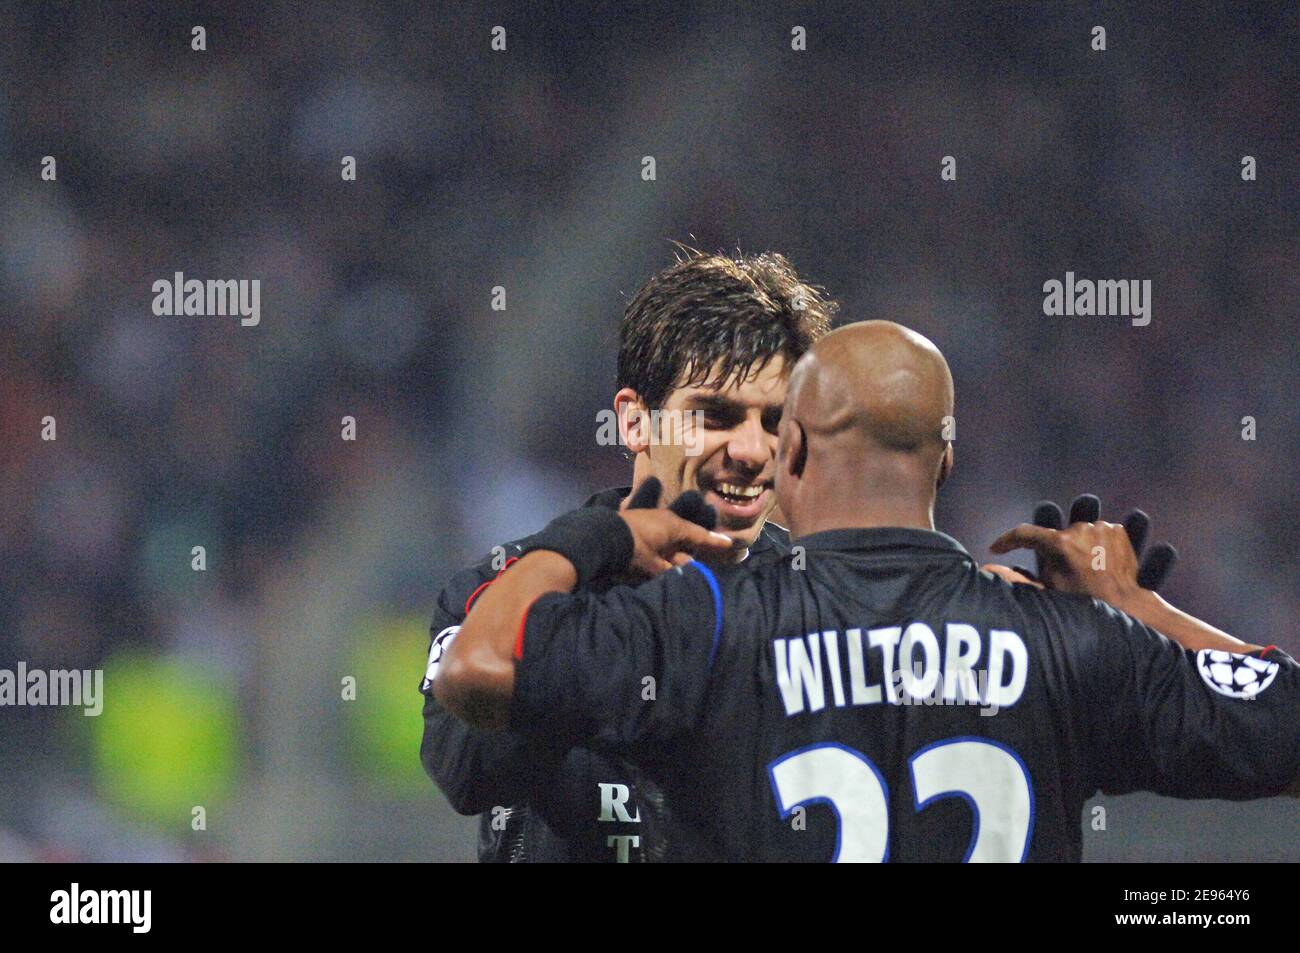 Olympic Lyonnais' Sylvain Wiltord celebrates his goal with team mate Juninho and Fred during the UEFA Champions league match, OLympic Lyonnais vs PSV Eindhoven at stade Gerland in Lyon, France on March 8, 2006. Olympic Lyonnais won 4-0. Photo by Stephane Kempinaire/Cameleon/ABACAPRESS.COM Stock Photo